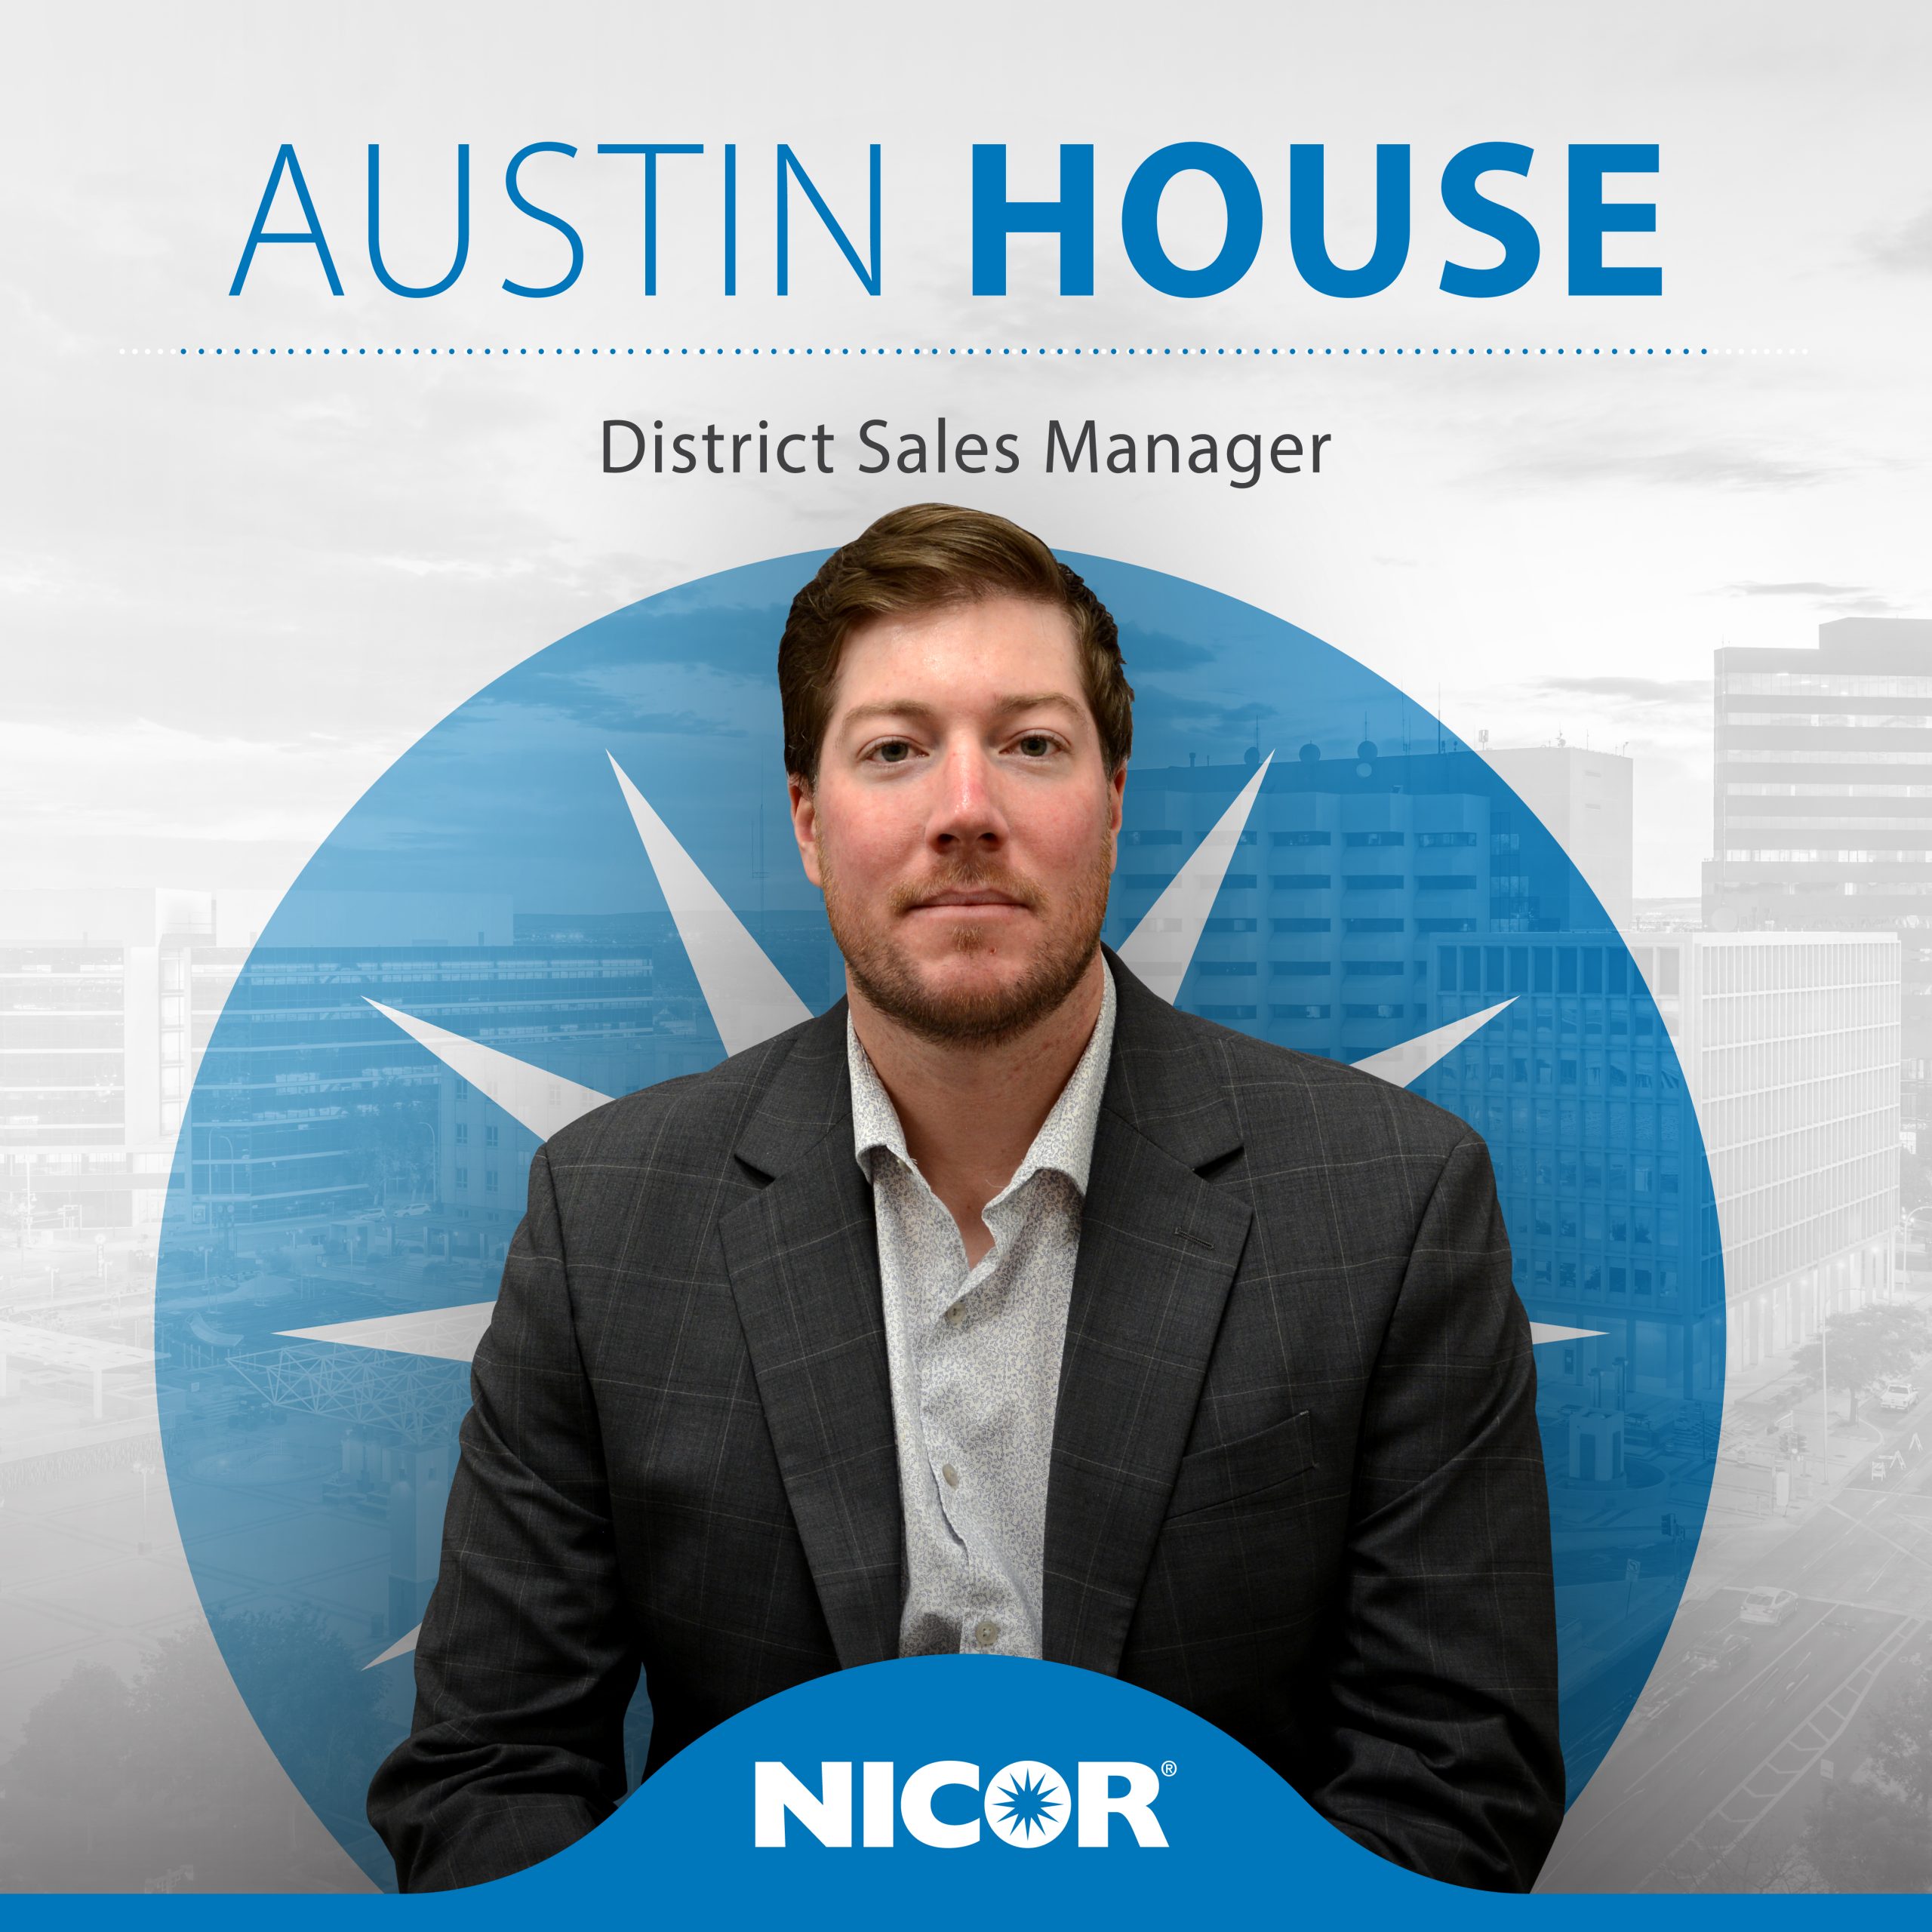 Austin House NICOR District Sales Manager